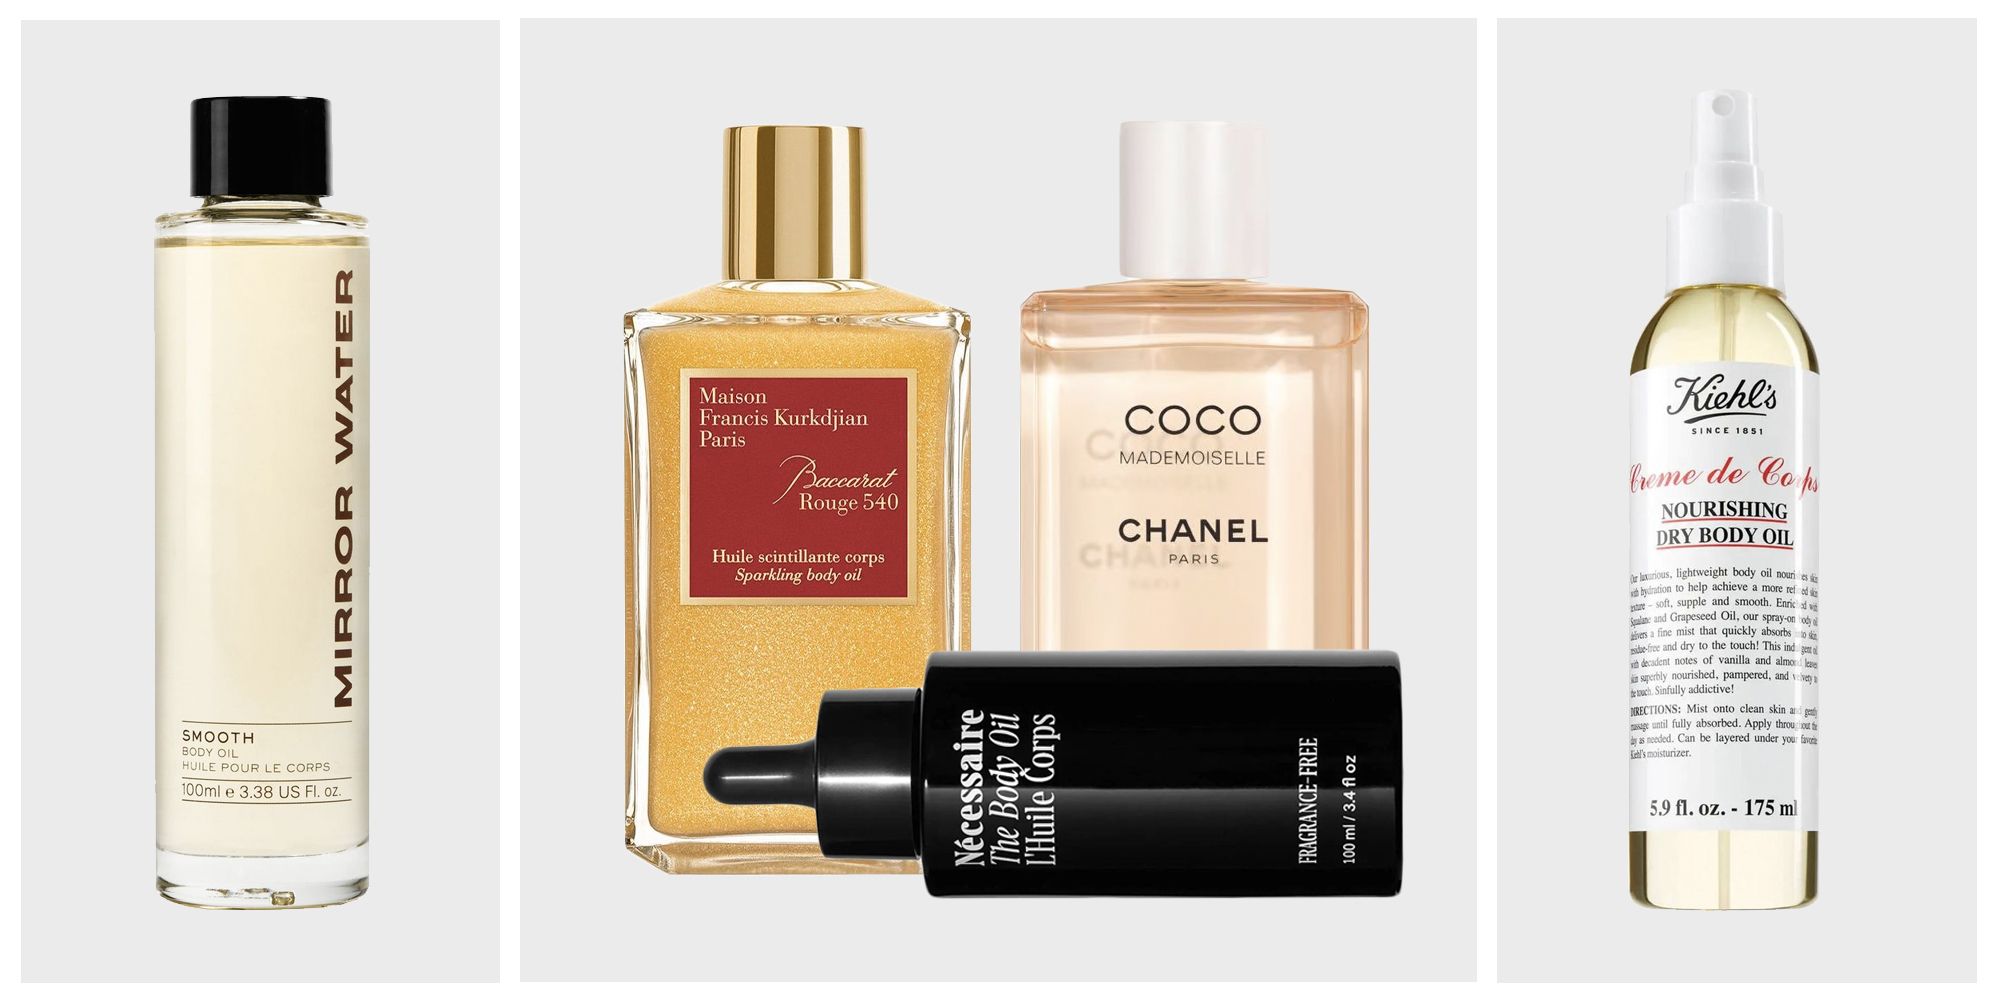 This Iconic Chanel Fragrance Also Comes In a Moisturizing Body Oil